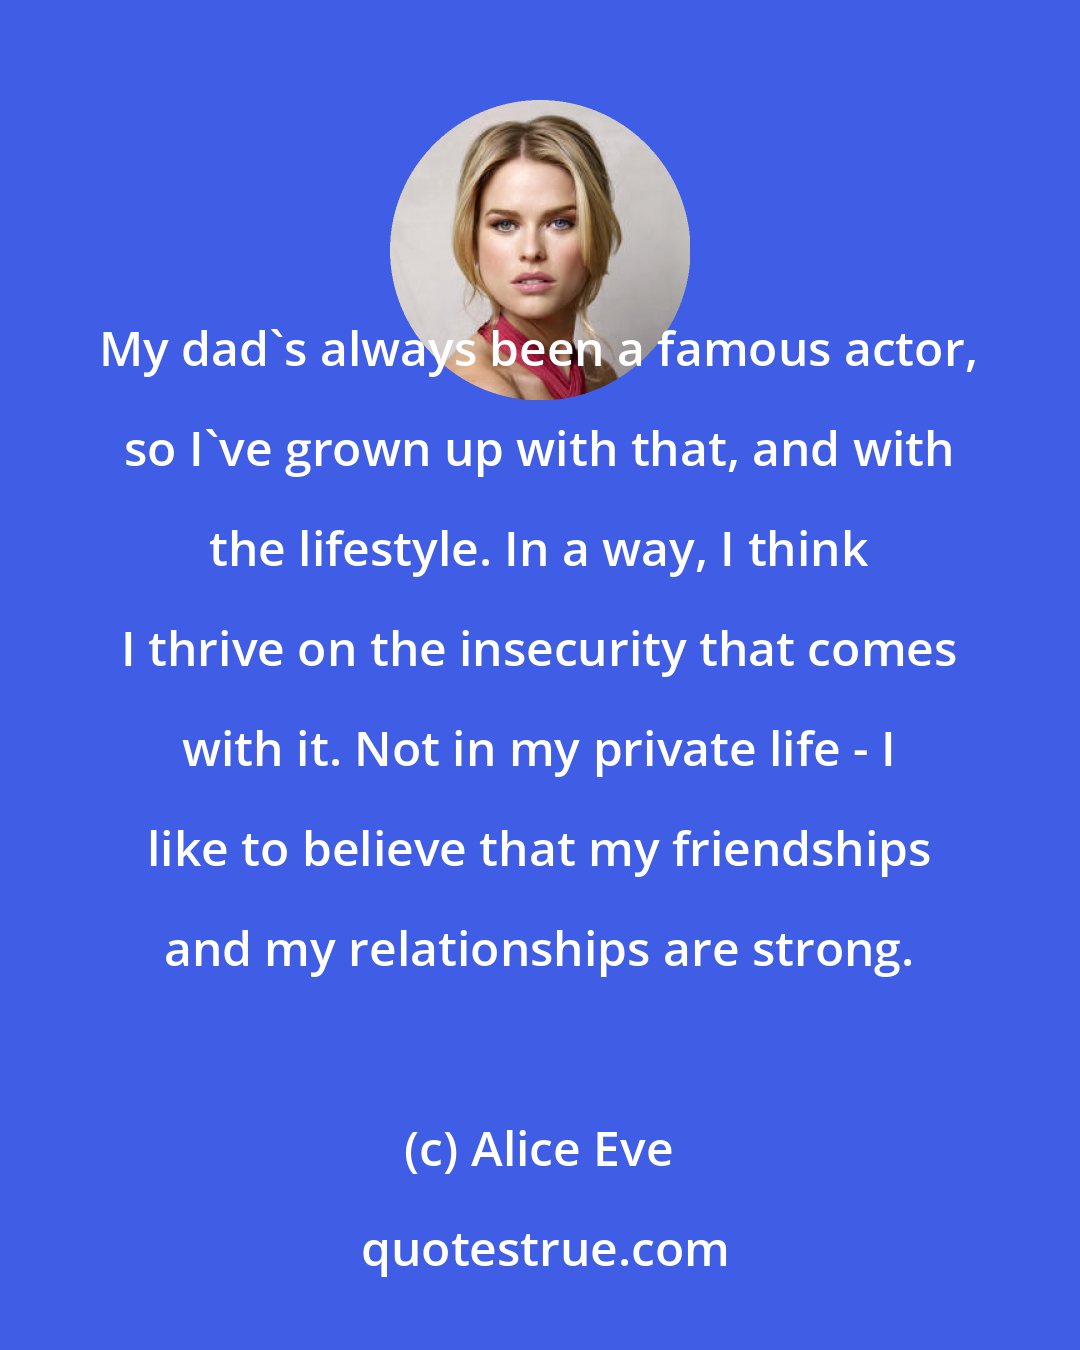 Alice Eve: My dad's always been a famous actor, so I've grown up with that, and with the lifestyle. In a way, I think I thrive on the insecurity that comes with it. Not in my private life - I like to believe that my friendships and my relationships are strong.